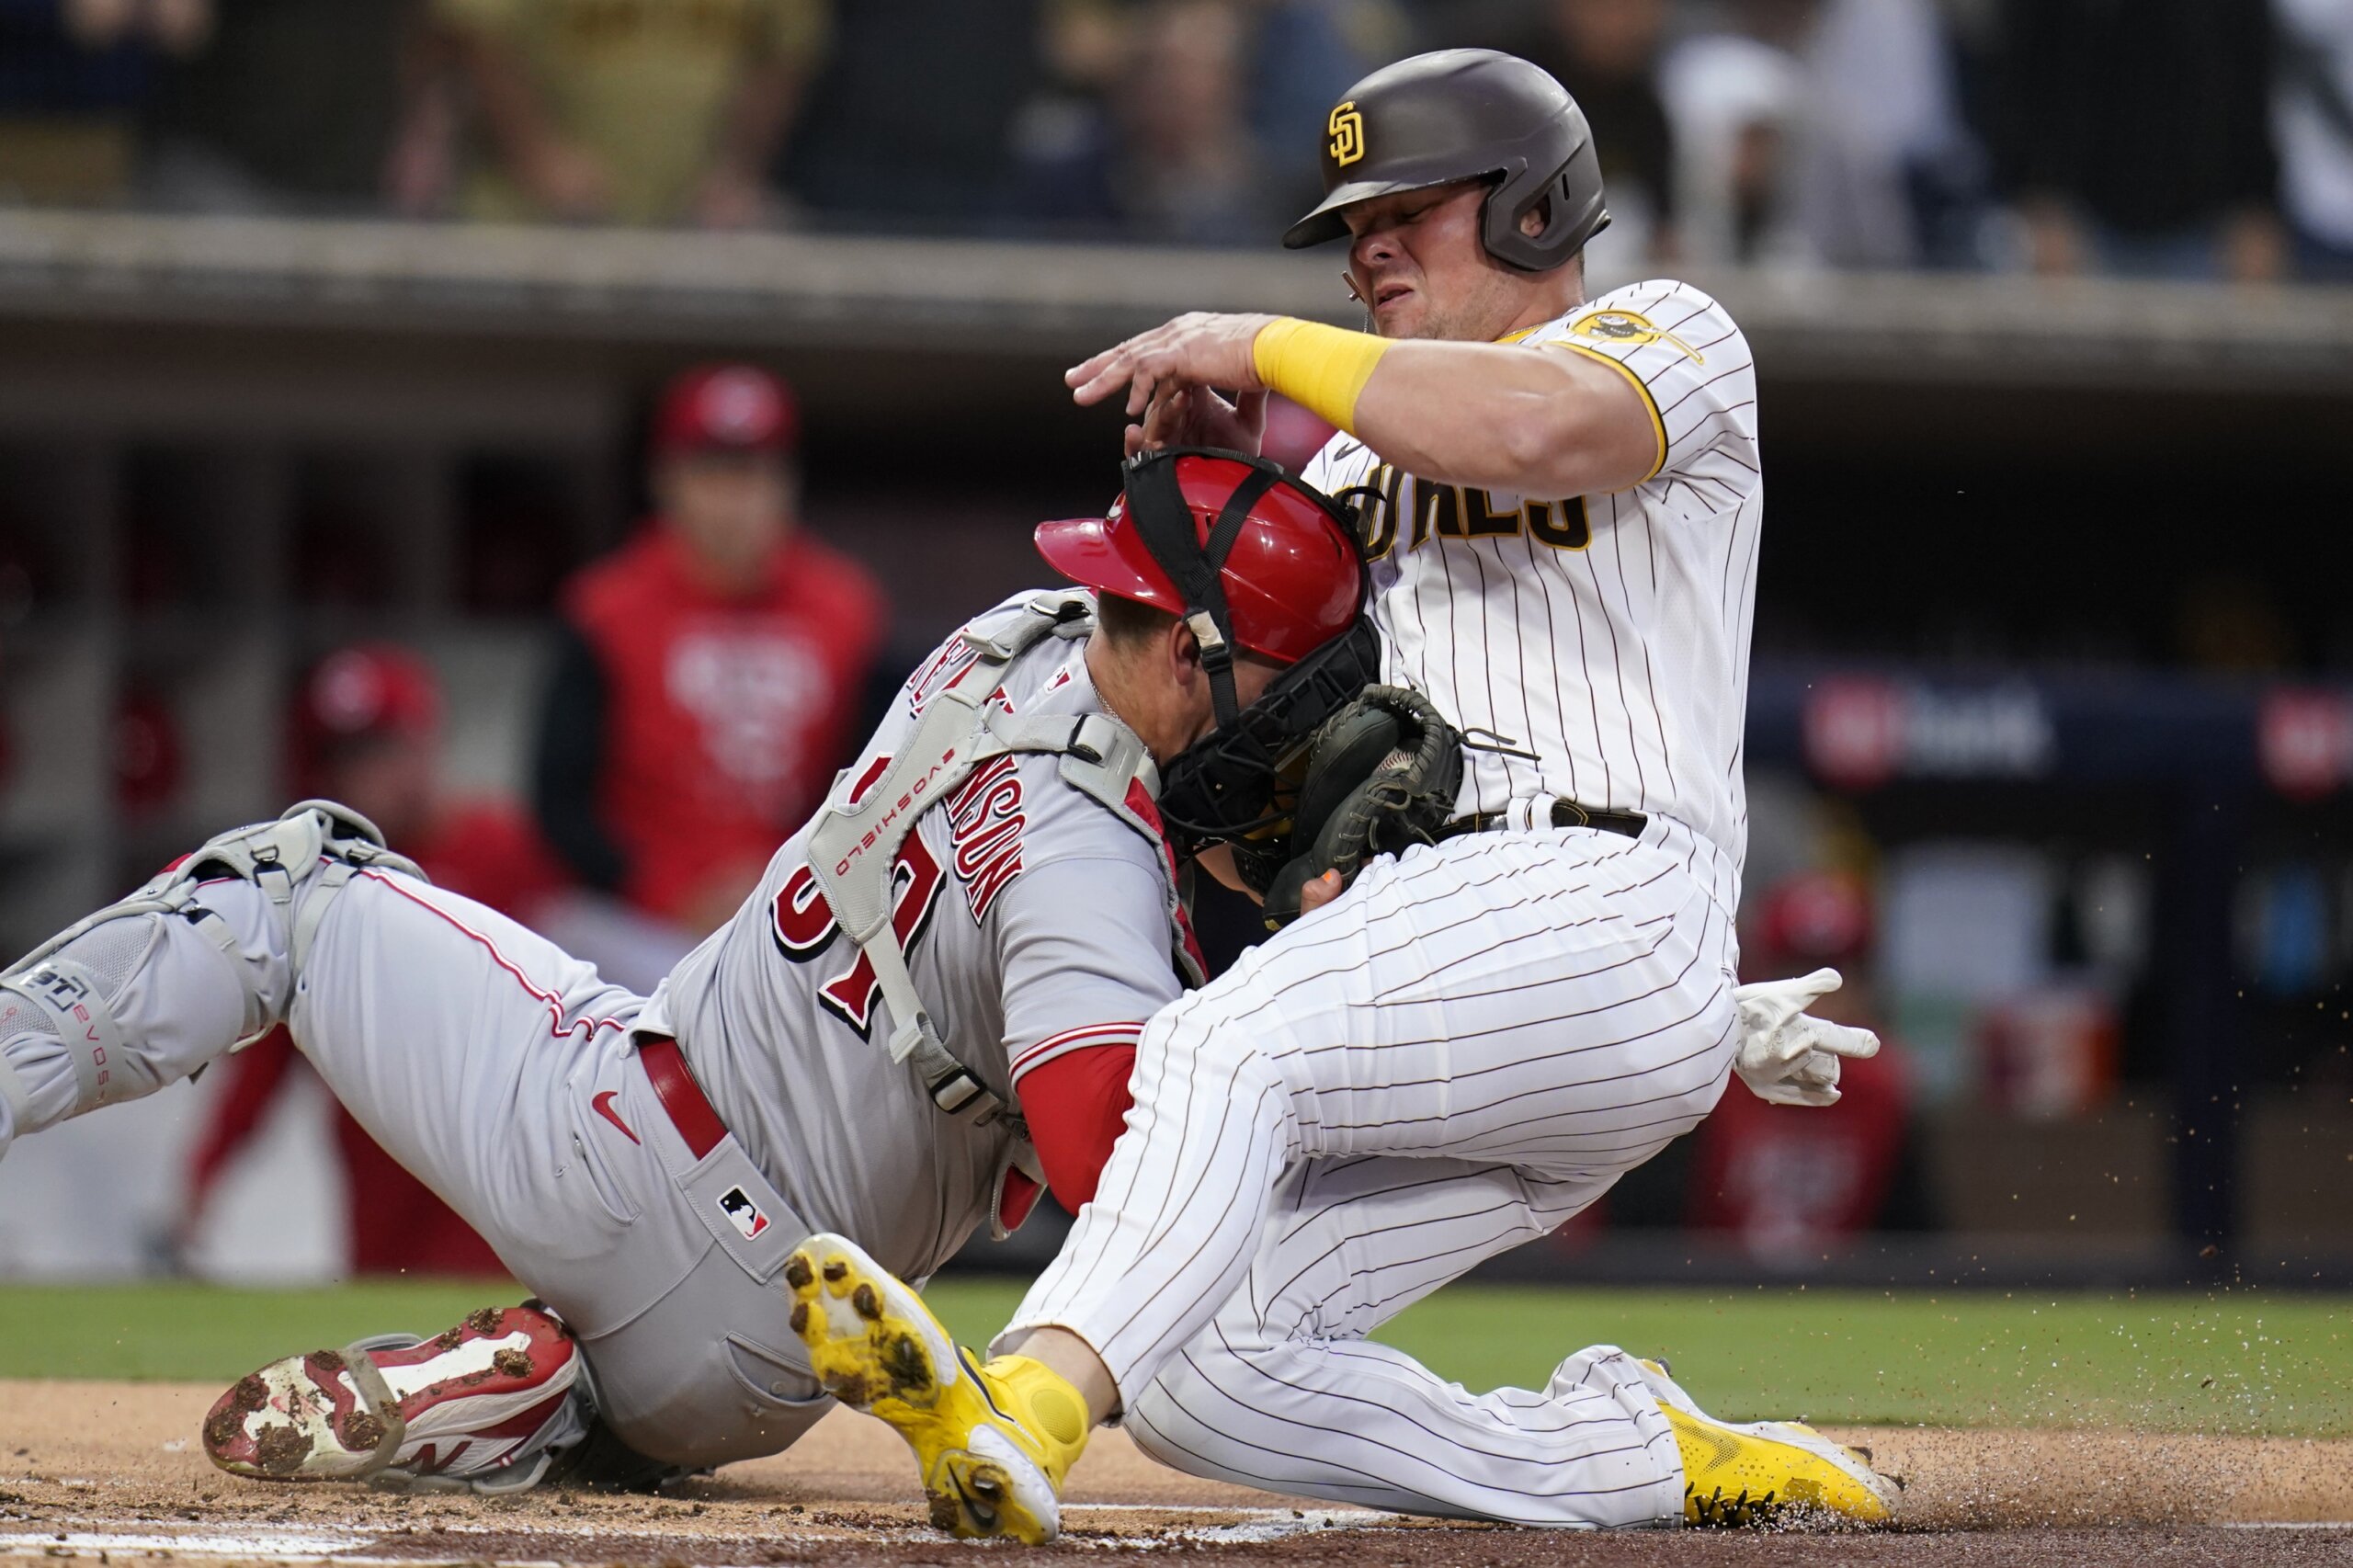 Reports: Brewers add Luke Voit, Tyler Naquin on minors deals